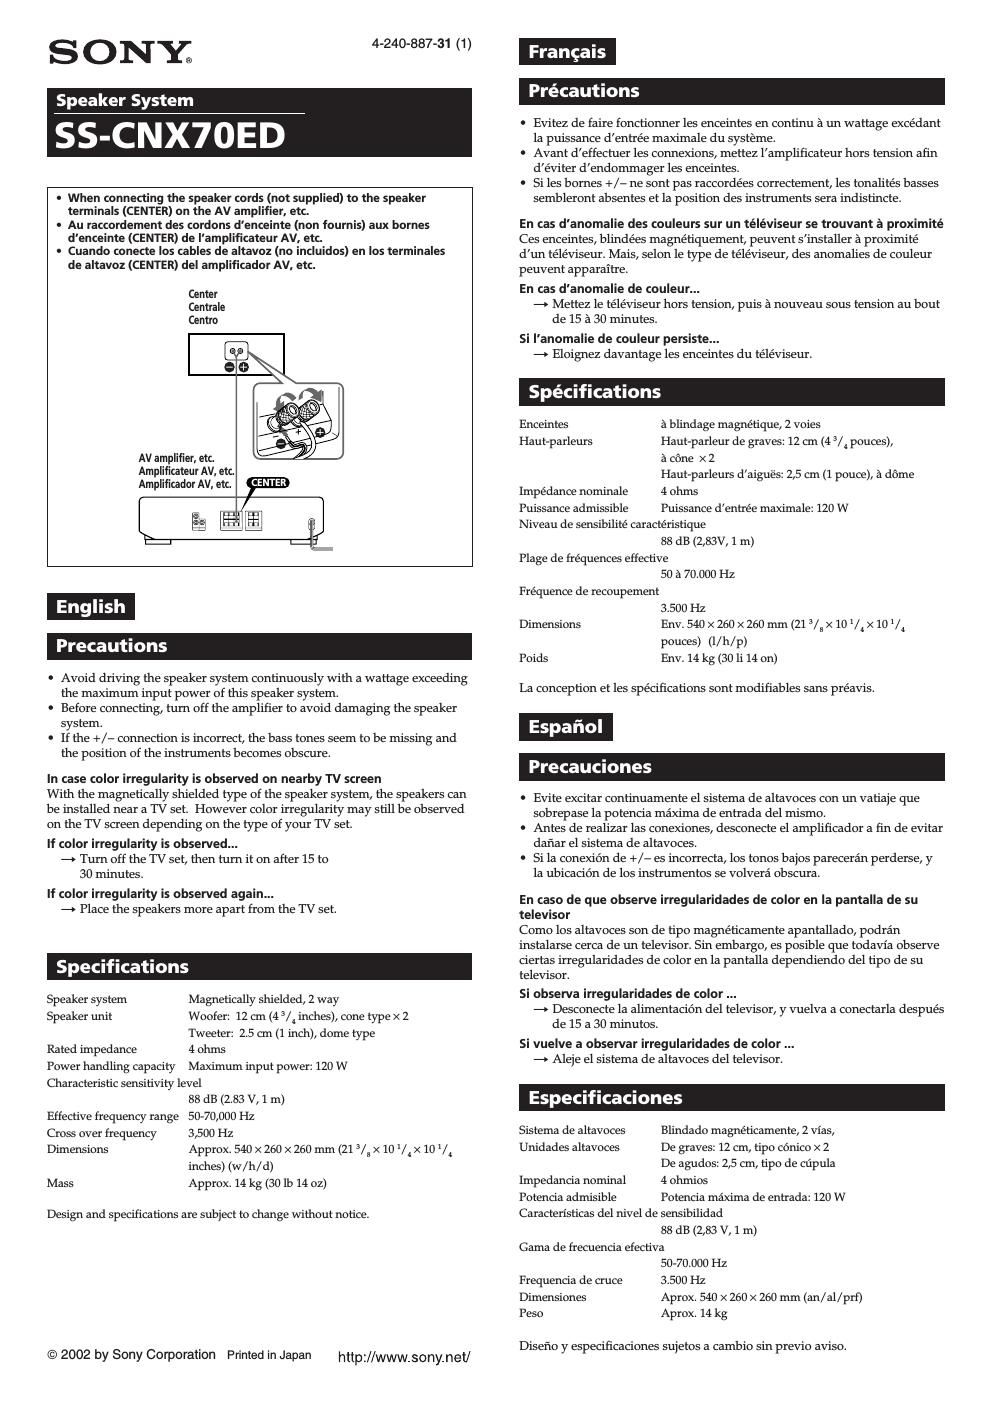 sony ss cnx 70 ed owners manual